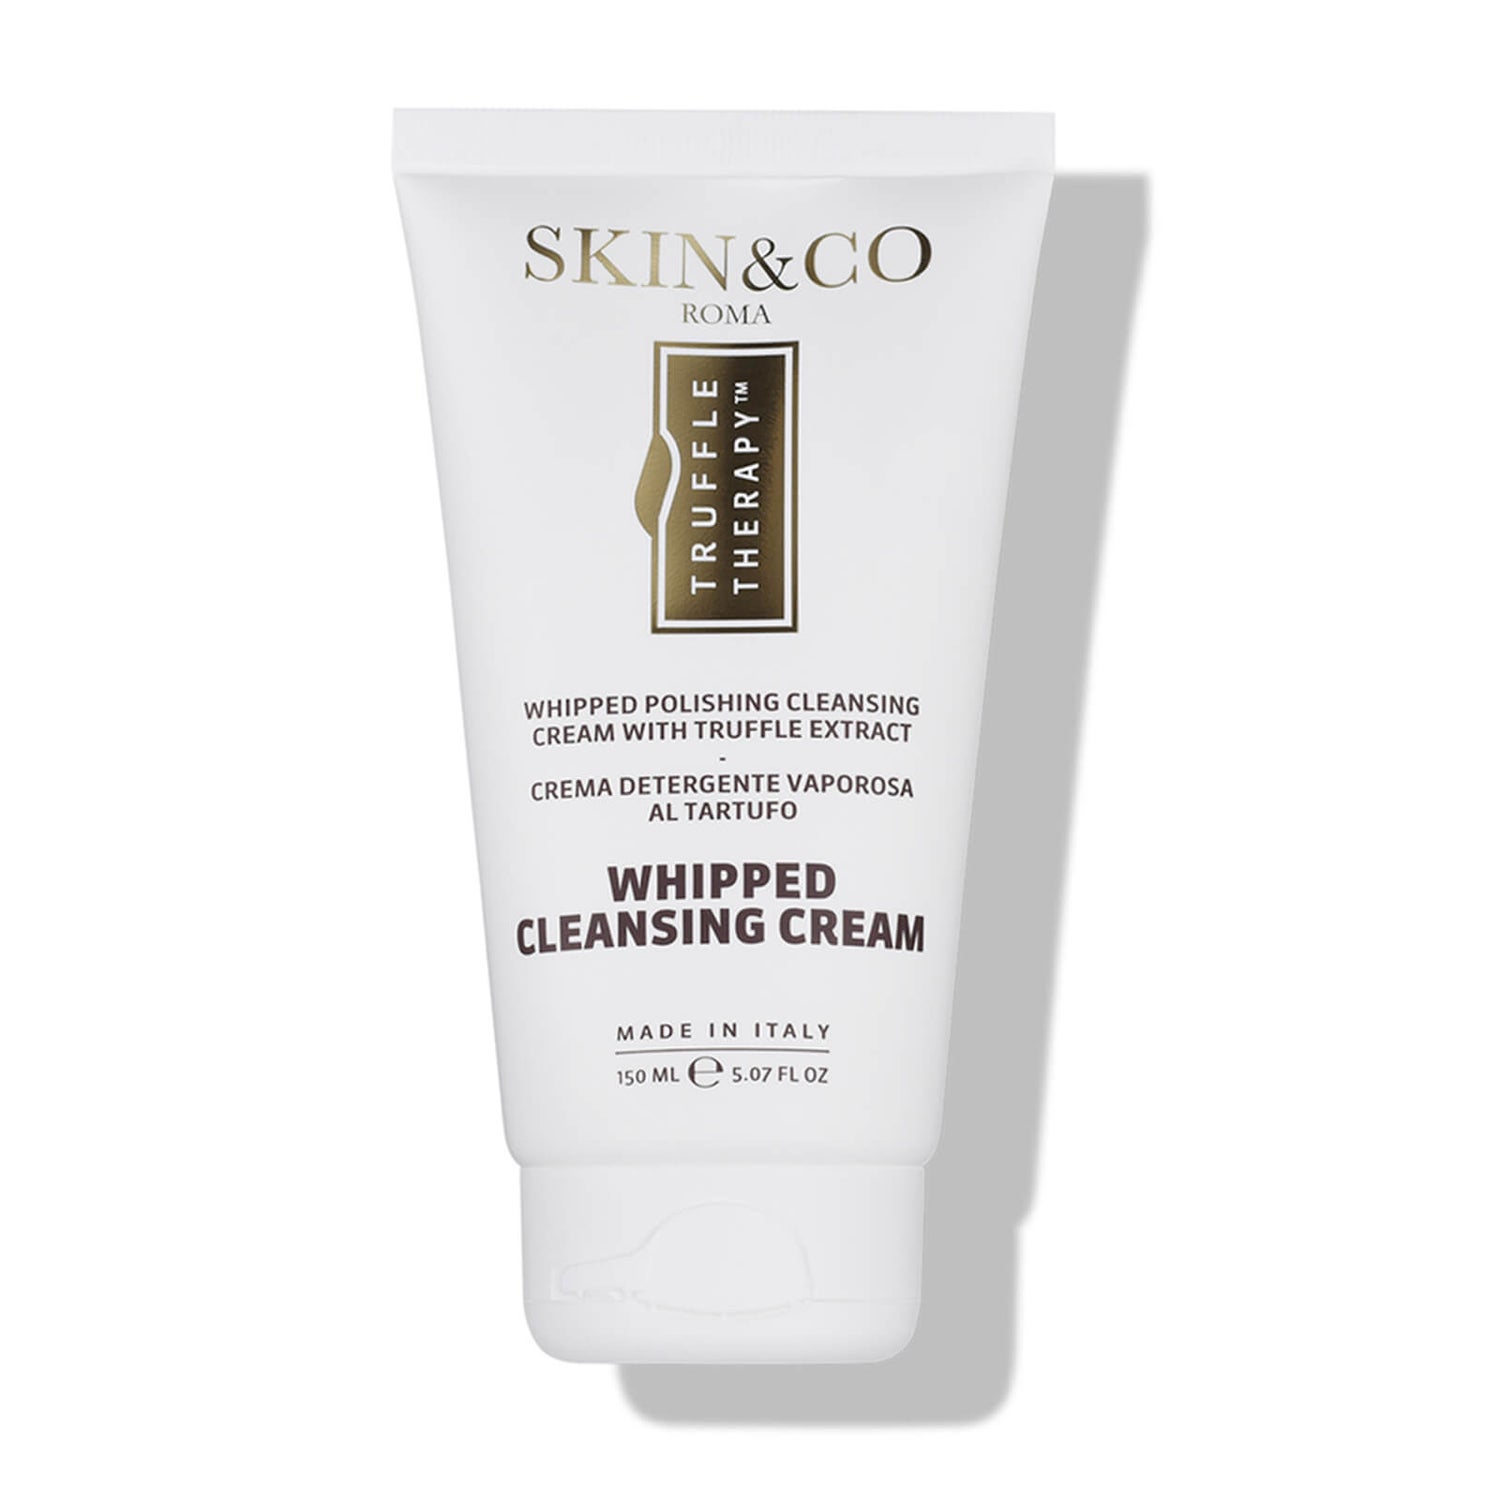 Skin&Co Roma Truffle Therapy Whipped Polishing Cleansing Cream 3.38 fl. oz